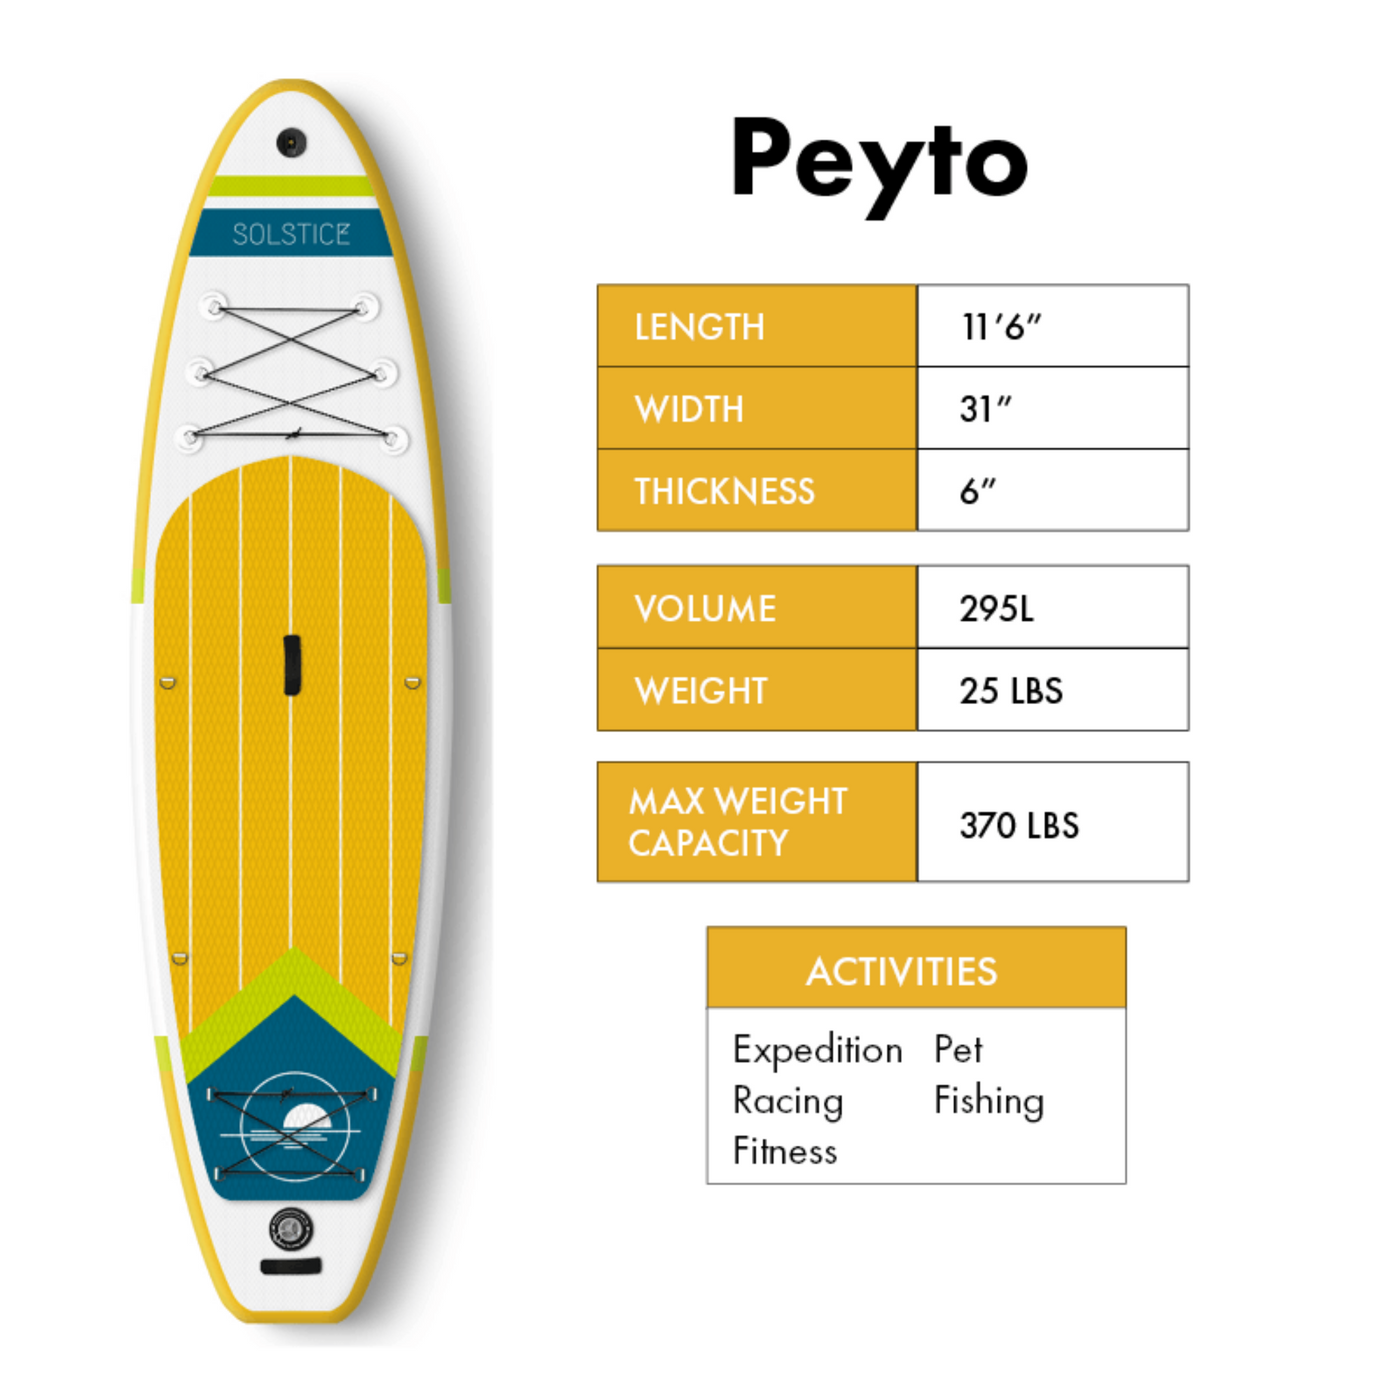 Solstice Paddle Boards Peyto Inflatable Stand up Paddle Board specifications